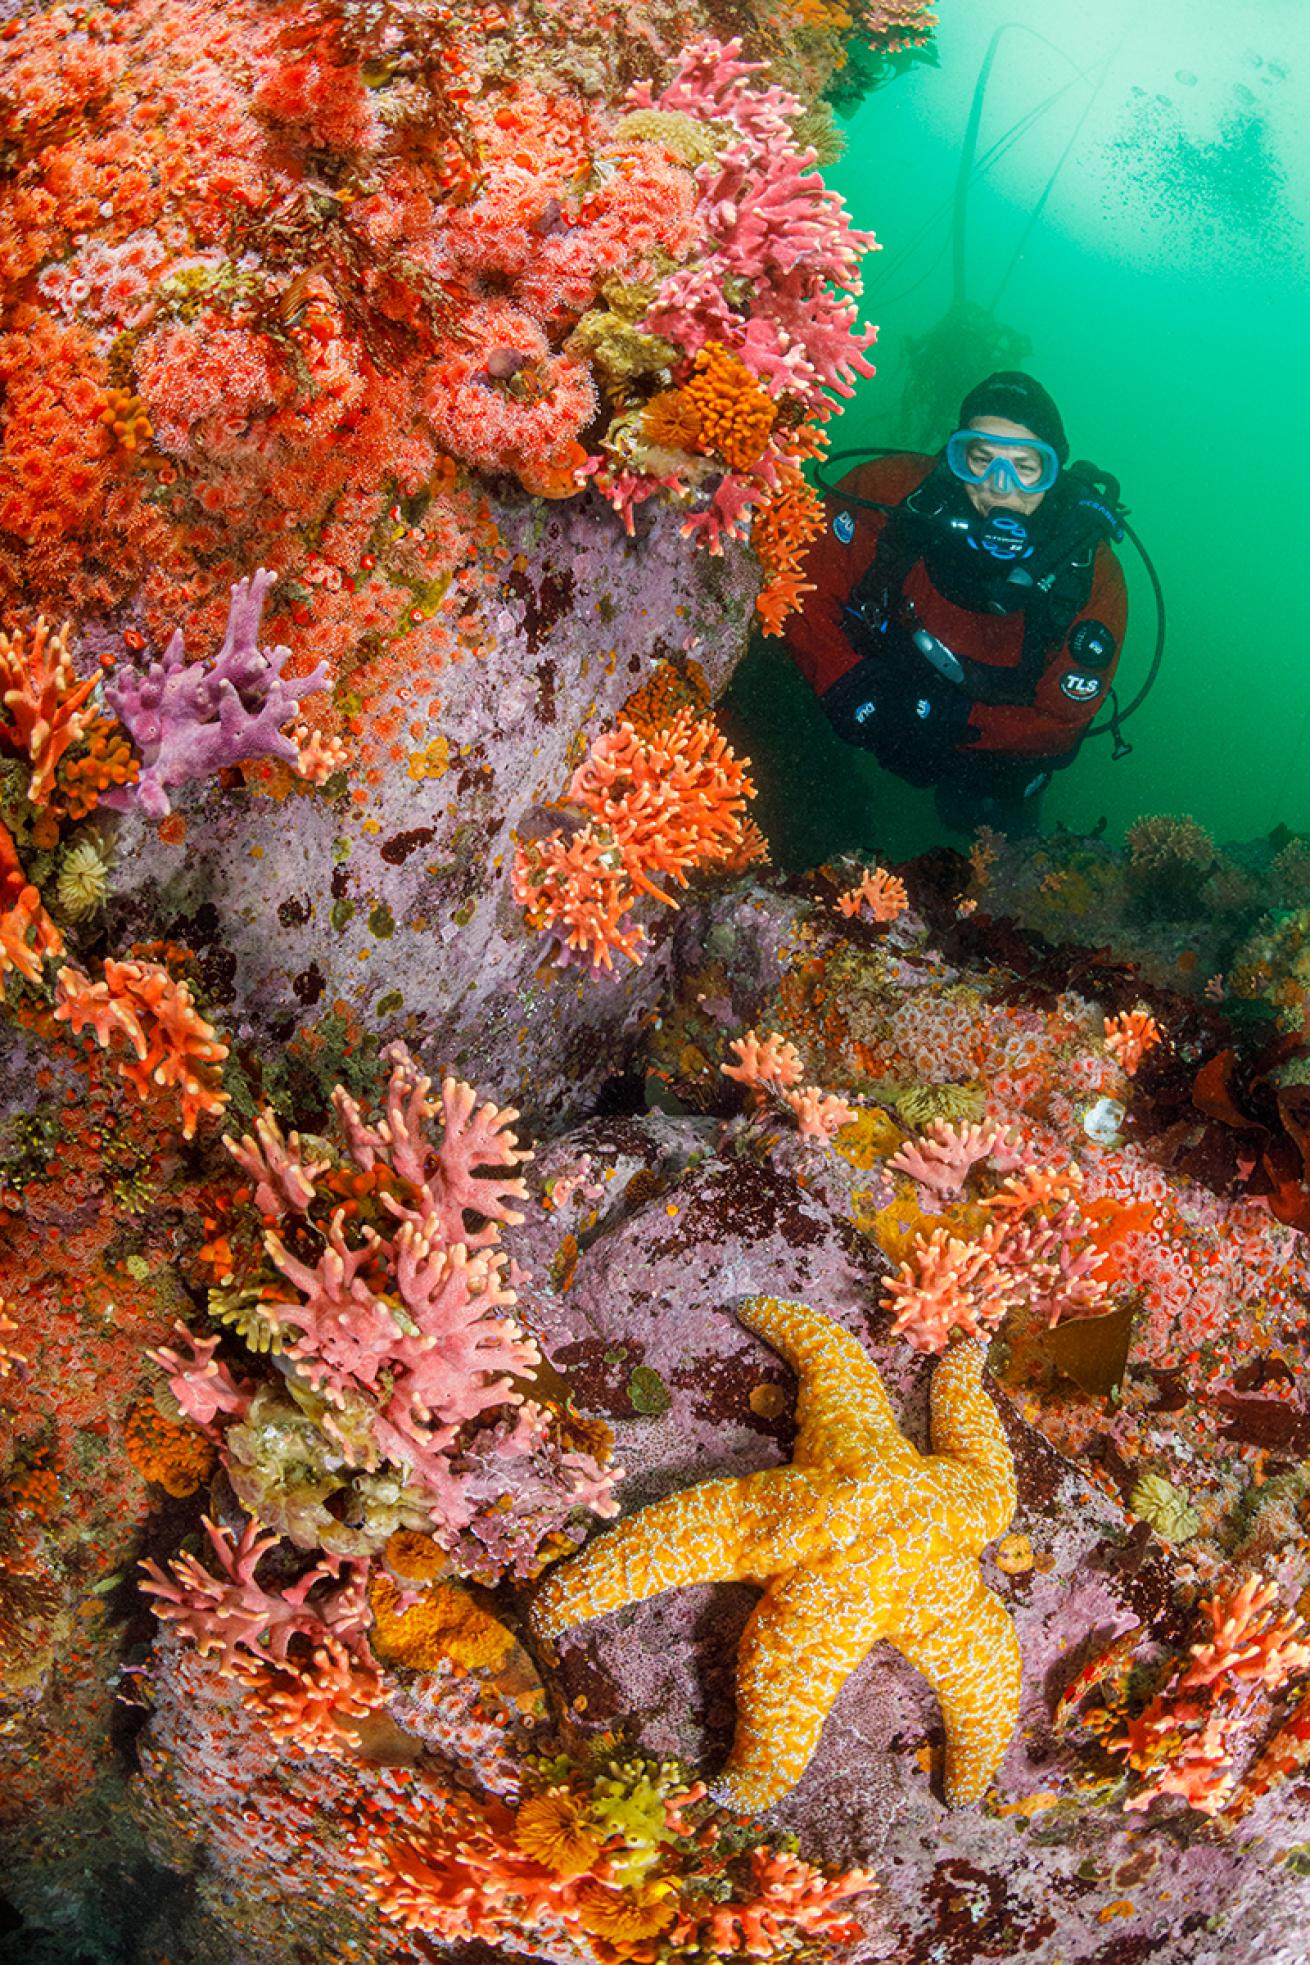 A diver peers around a reef in California waters